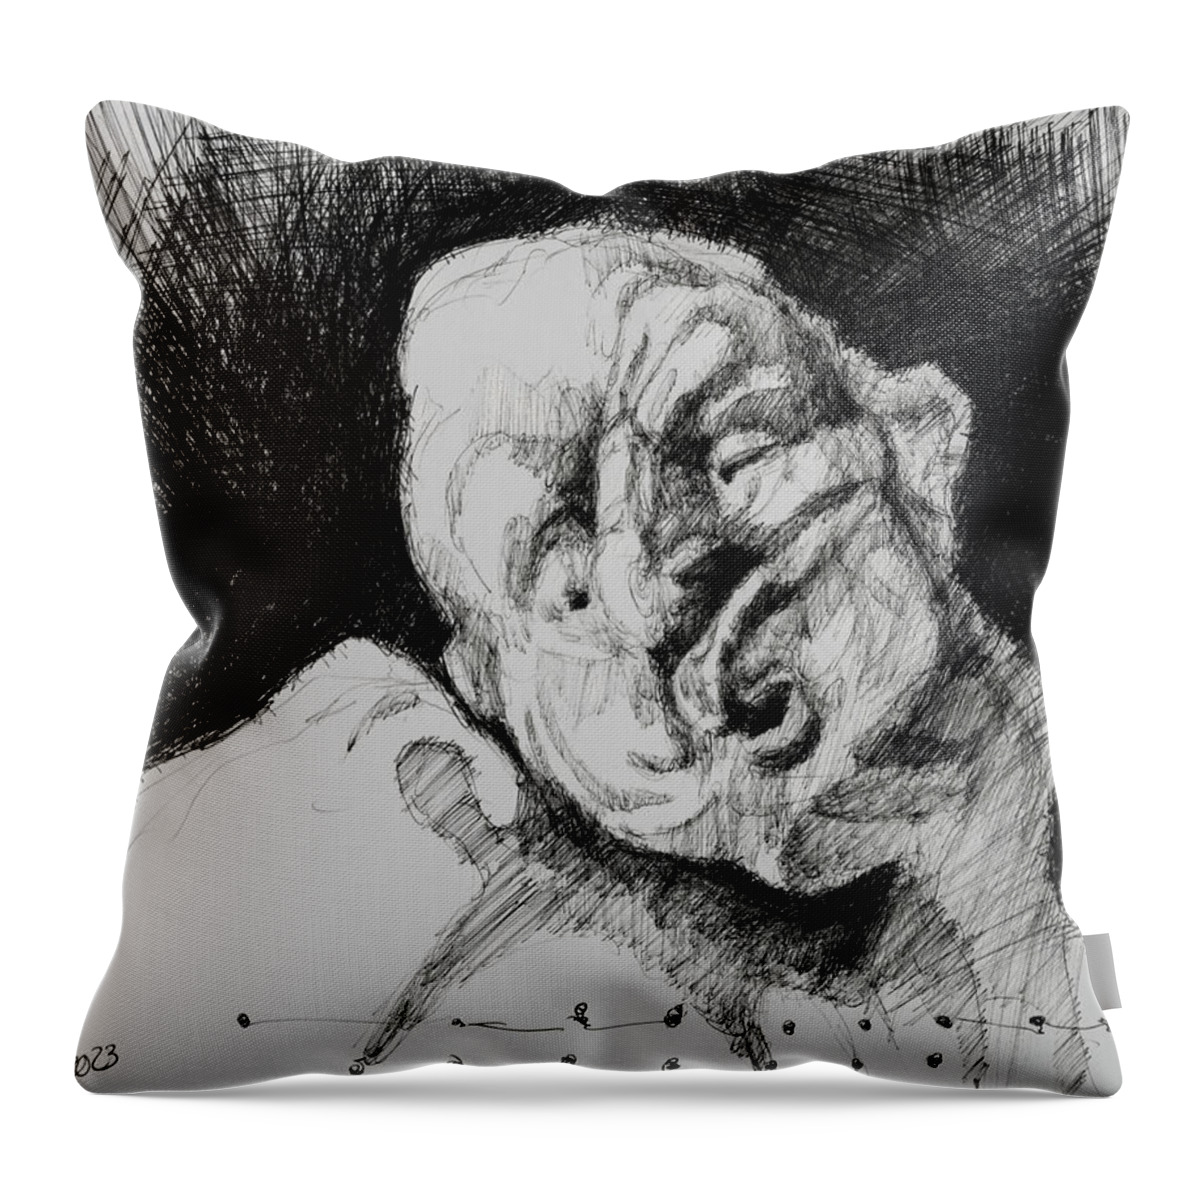 #cleftlip Throw Pillow featuring the drawing Woman With Cleft Lip 3 by Veronica Huacuja